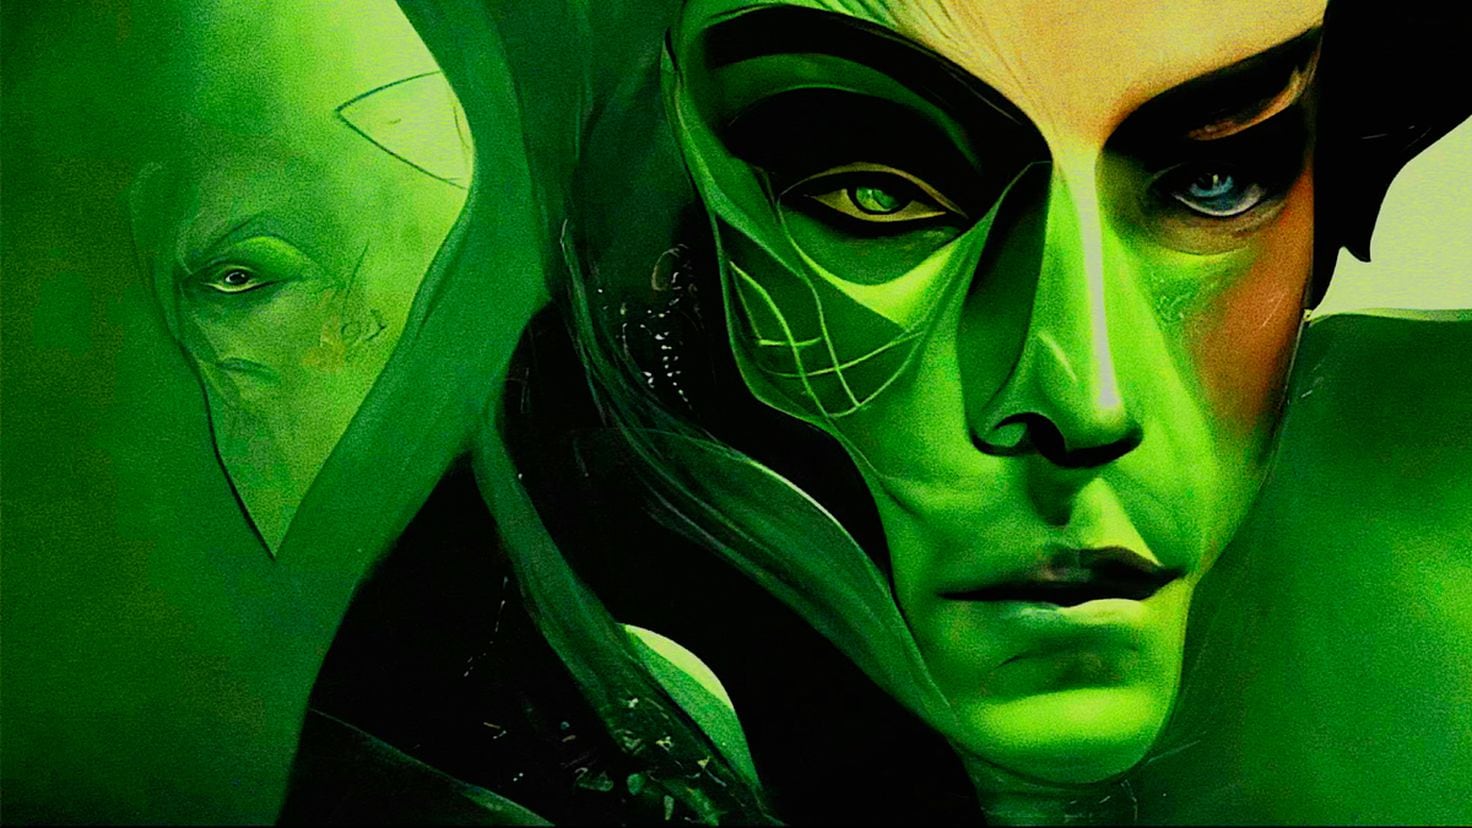 AI Controversy In Secret Invasion's Opening Credit By Marvel